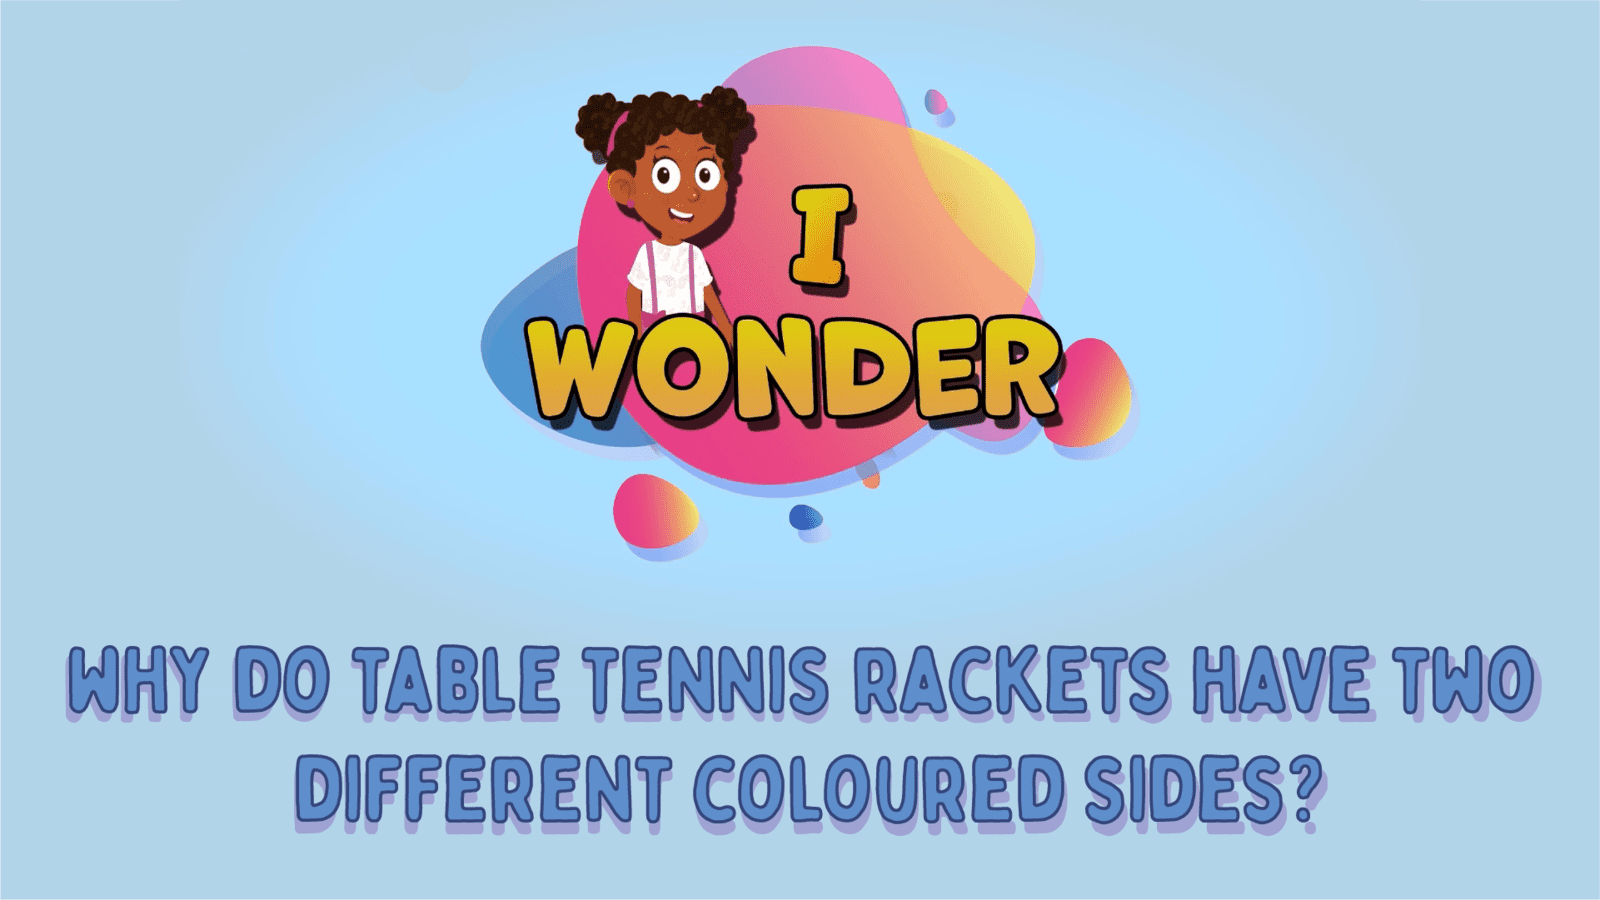 Why Do Table Tennis Rackets Have Two Different Coloured Sides?